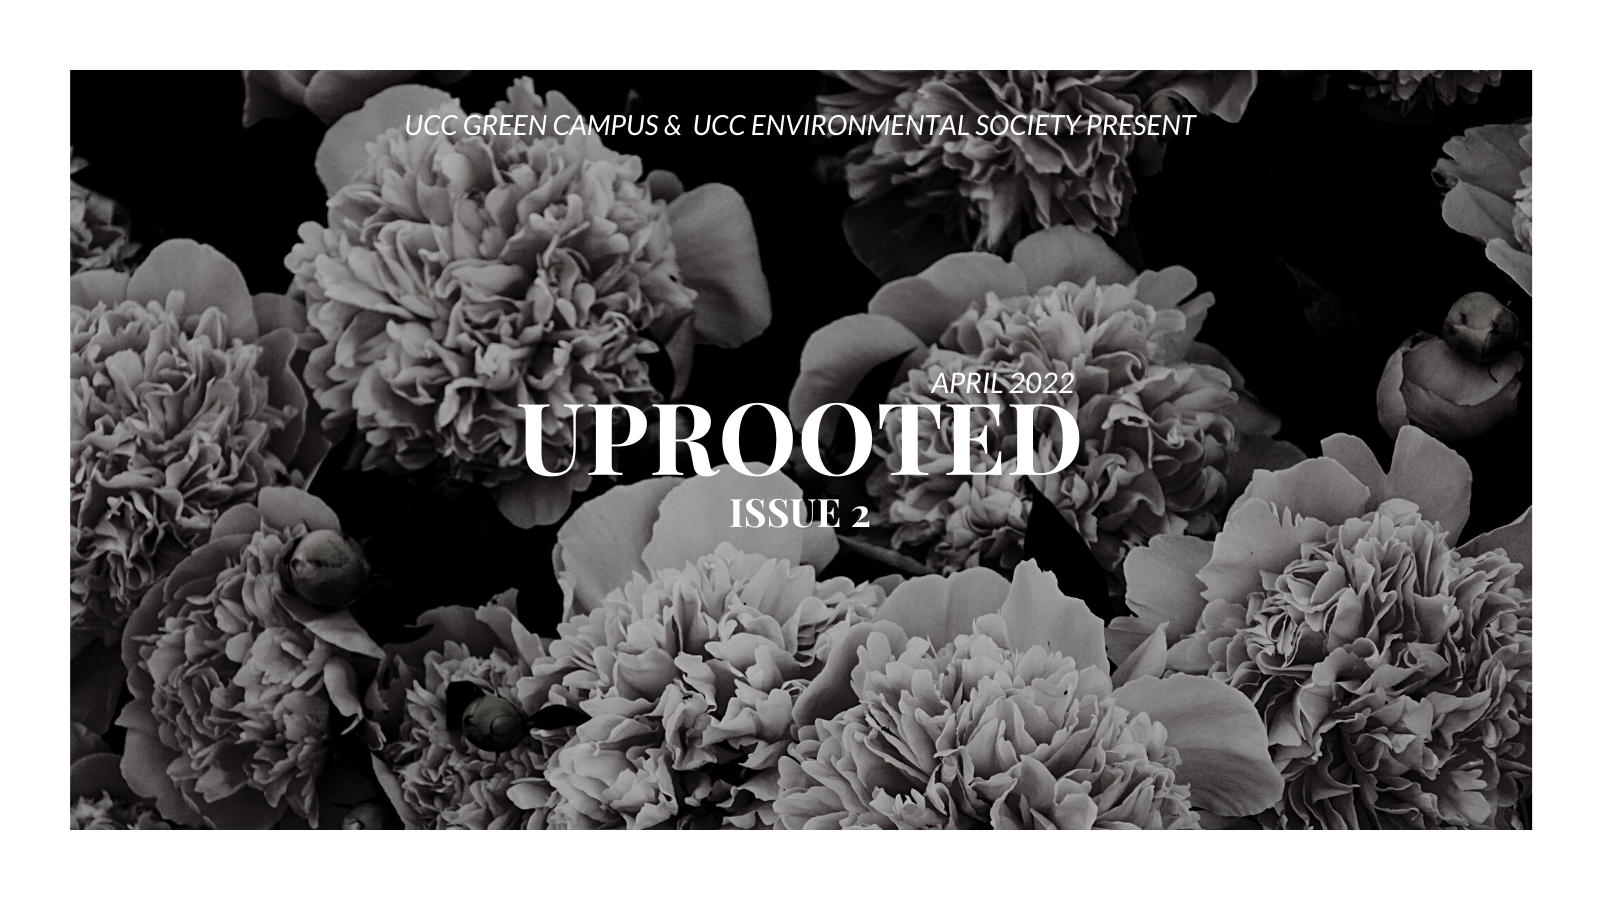 Issue 2 of Uprooted